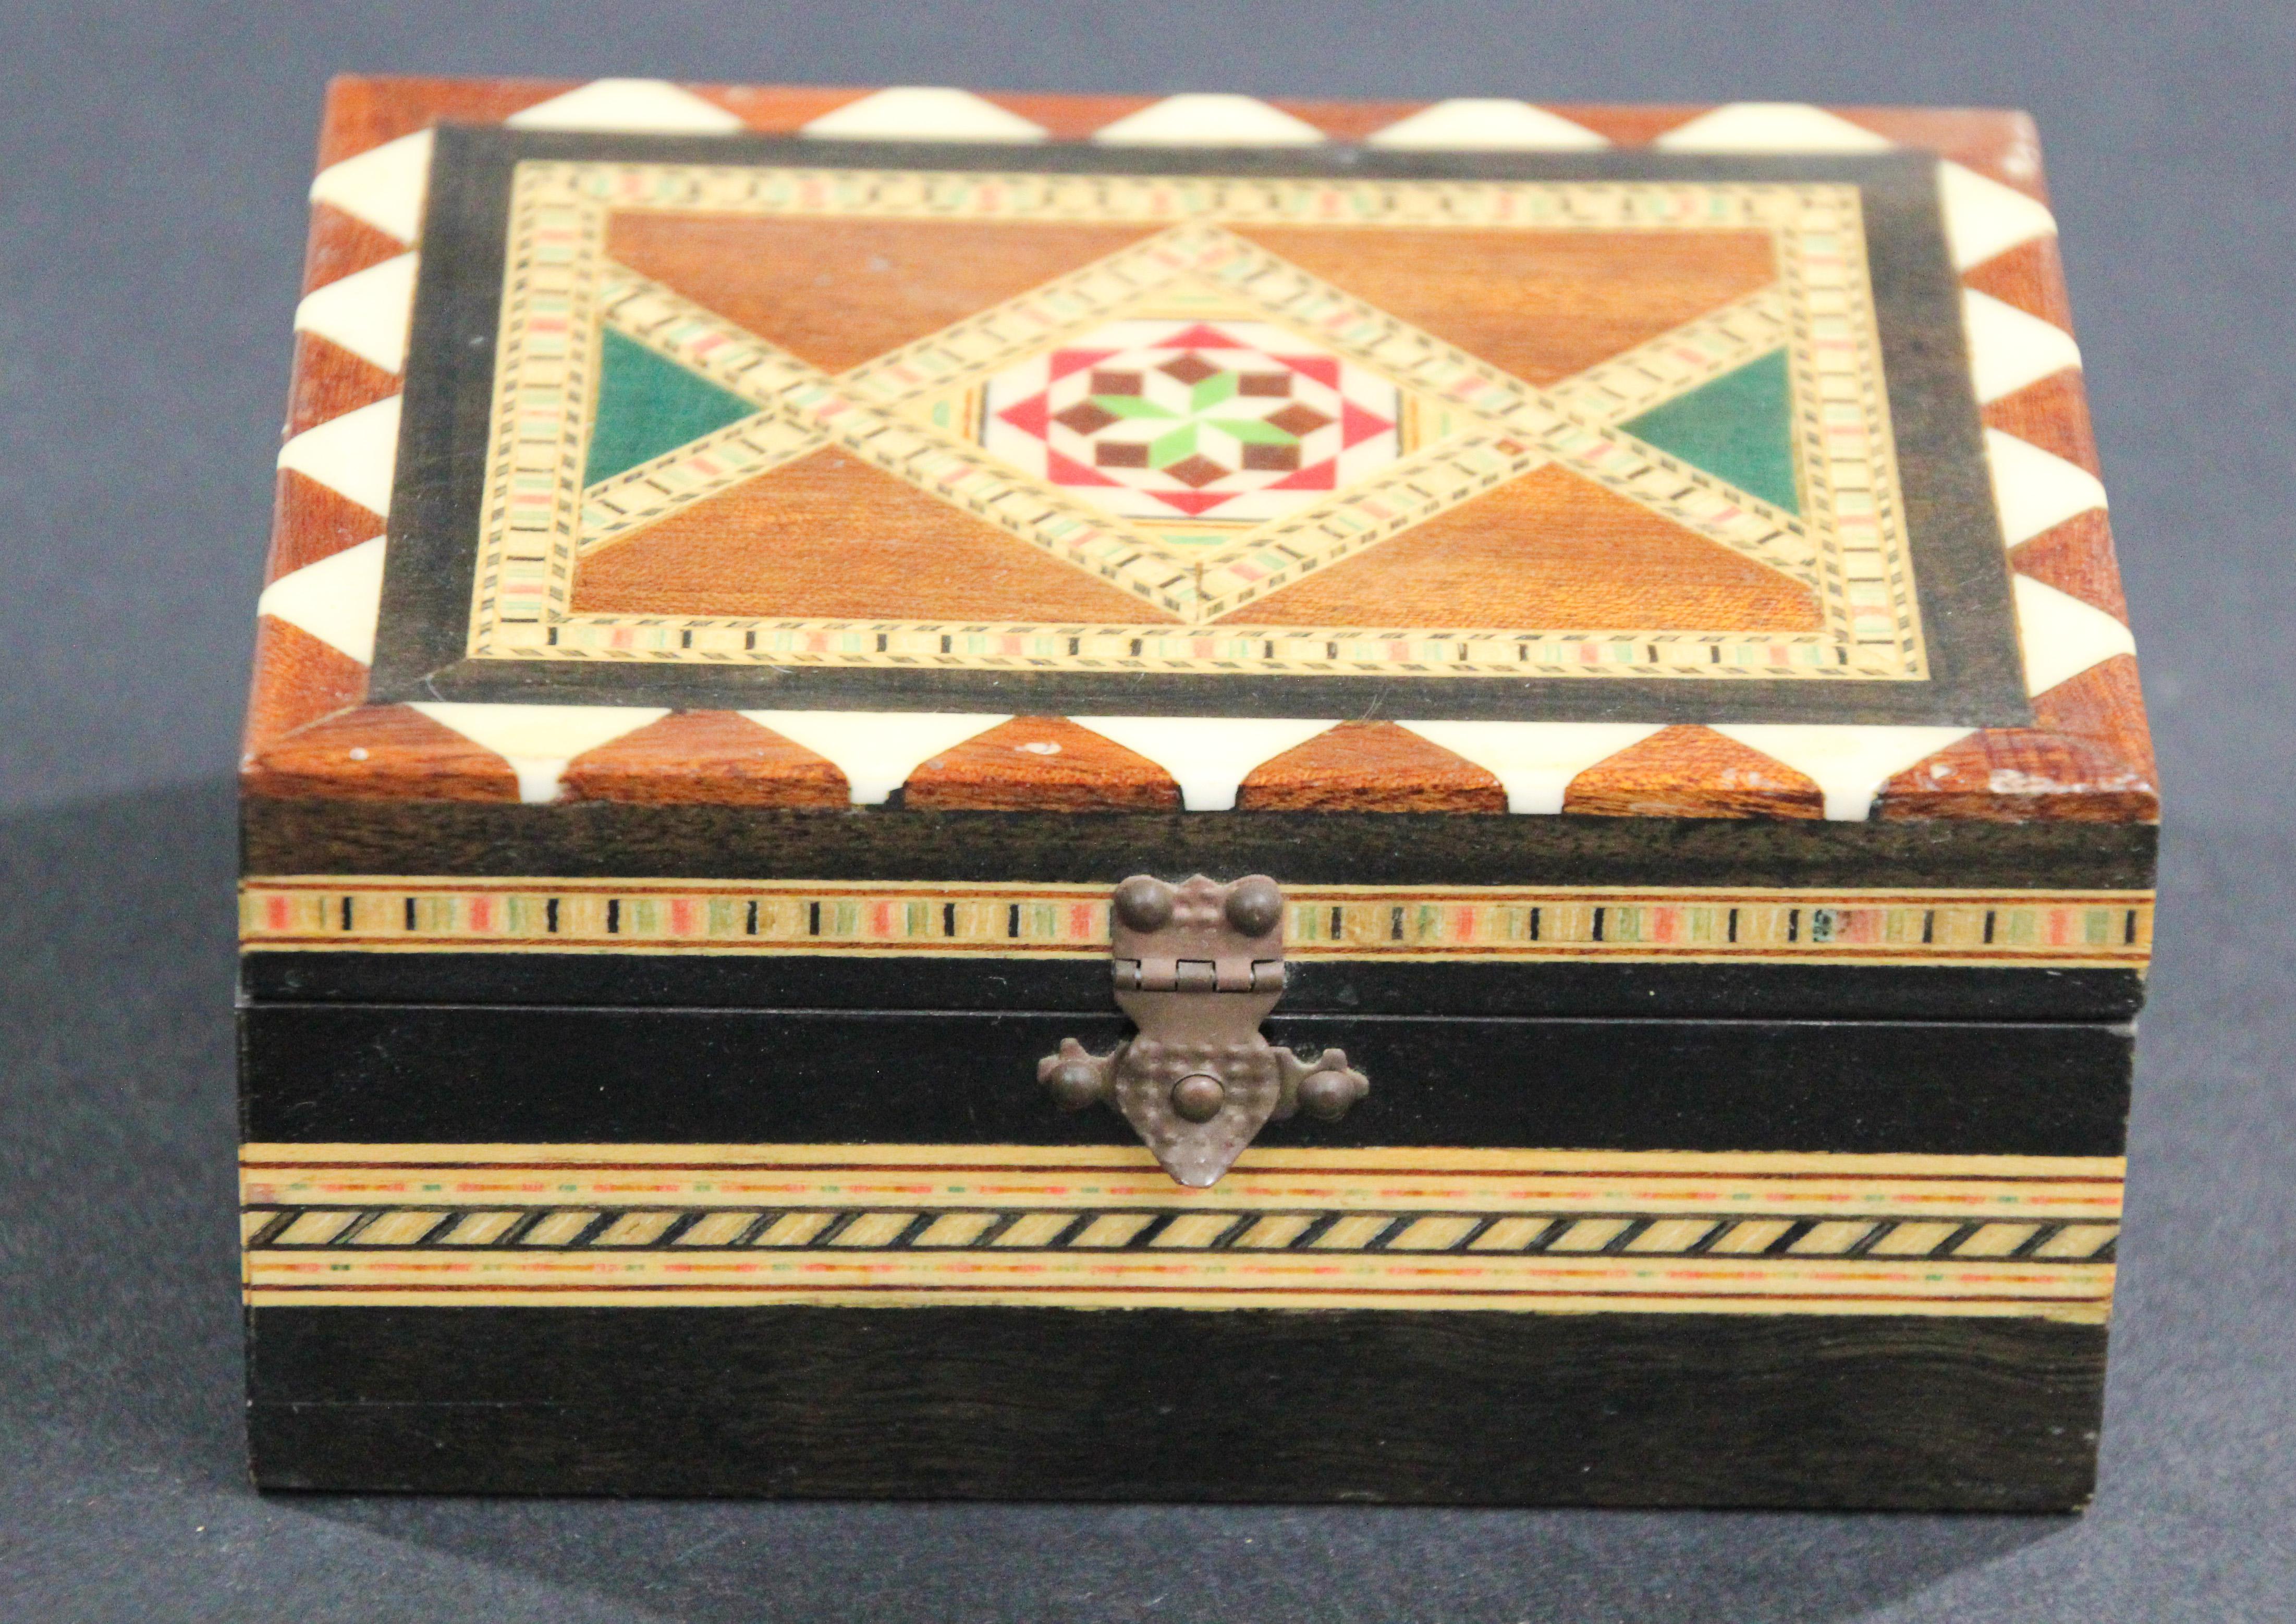 Exquisite handcrafted Middle Eastern mosaic marquetry inlaid walnut wood box.
Handmade Vintage small Marquetry trinket box by Victor Molero, handcrafted in Granada Spain.
Small box intricately decorated with Moorish motif designs which have been